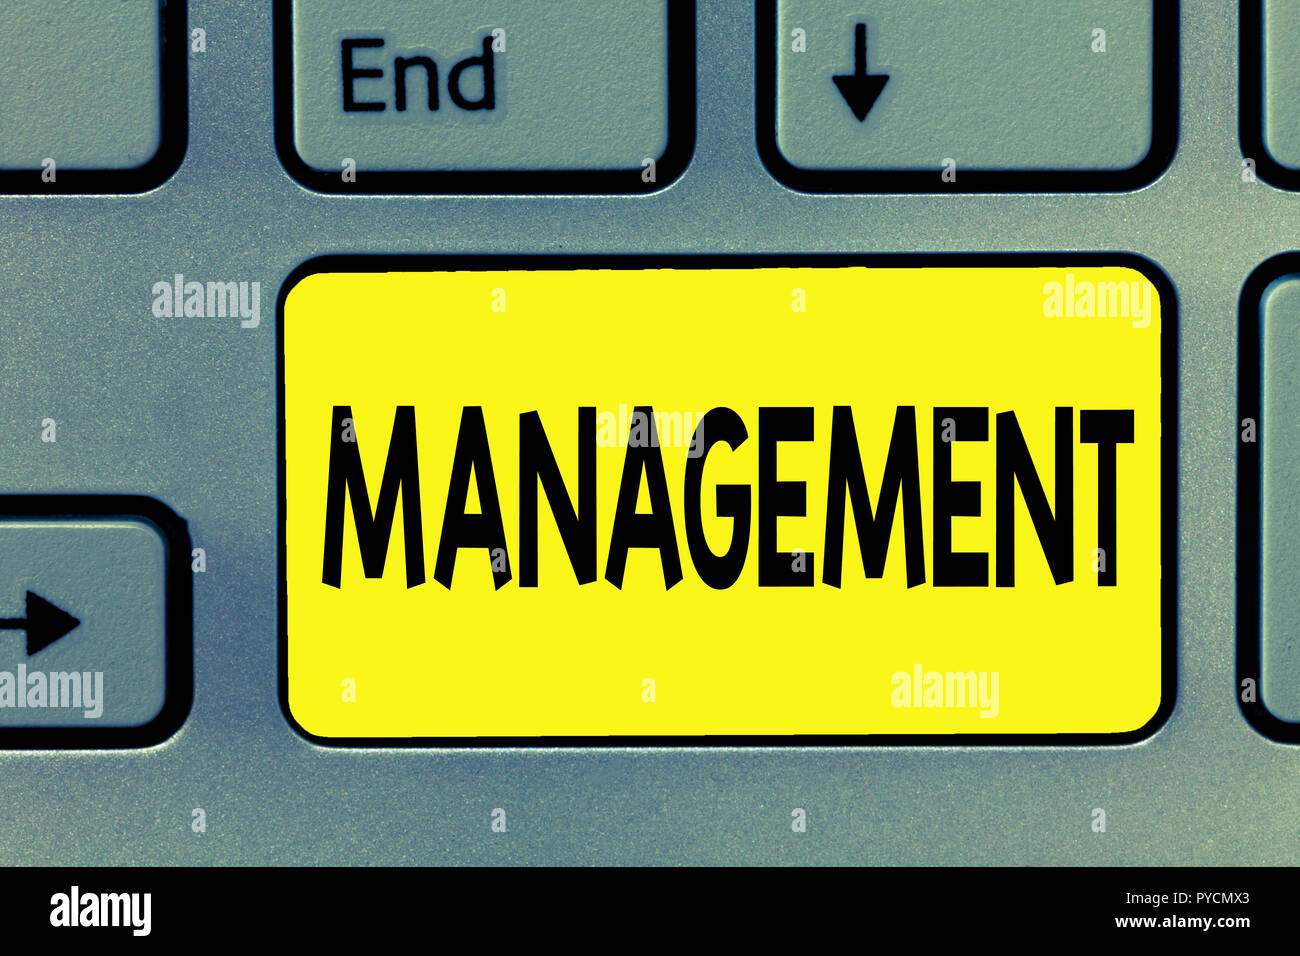 Word writing text Management. Business concept for Process dealing with Controlling things showing Company strategy. Stock Photo